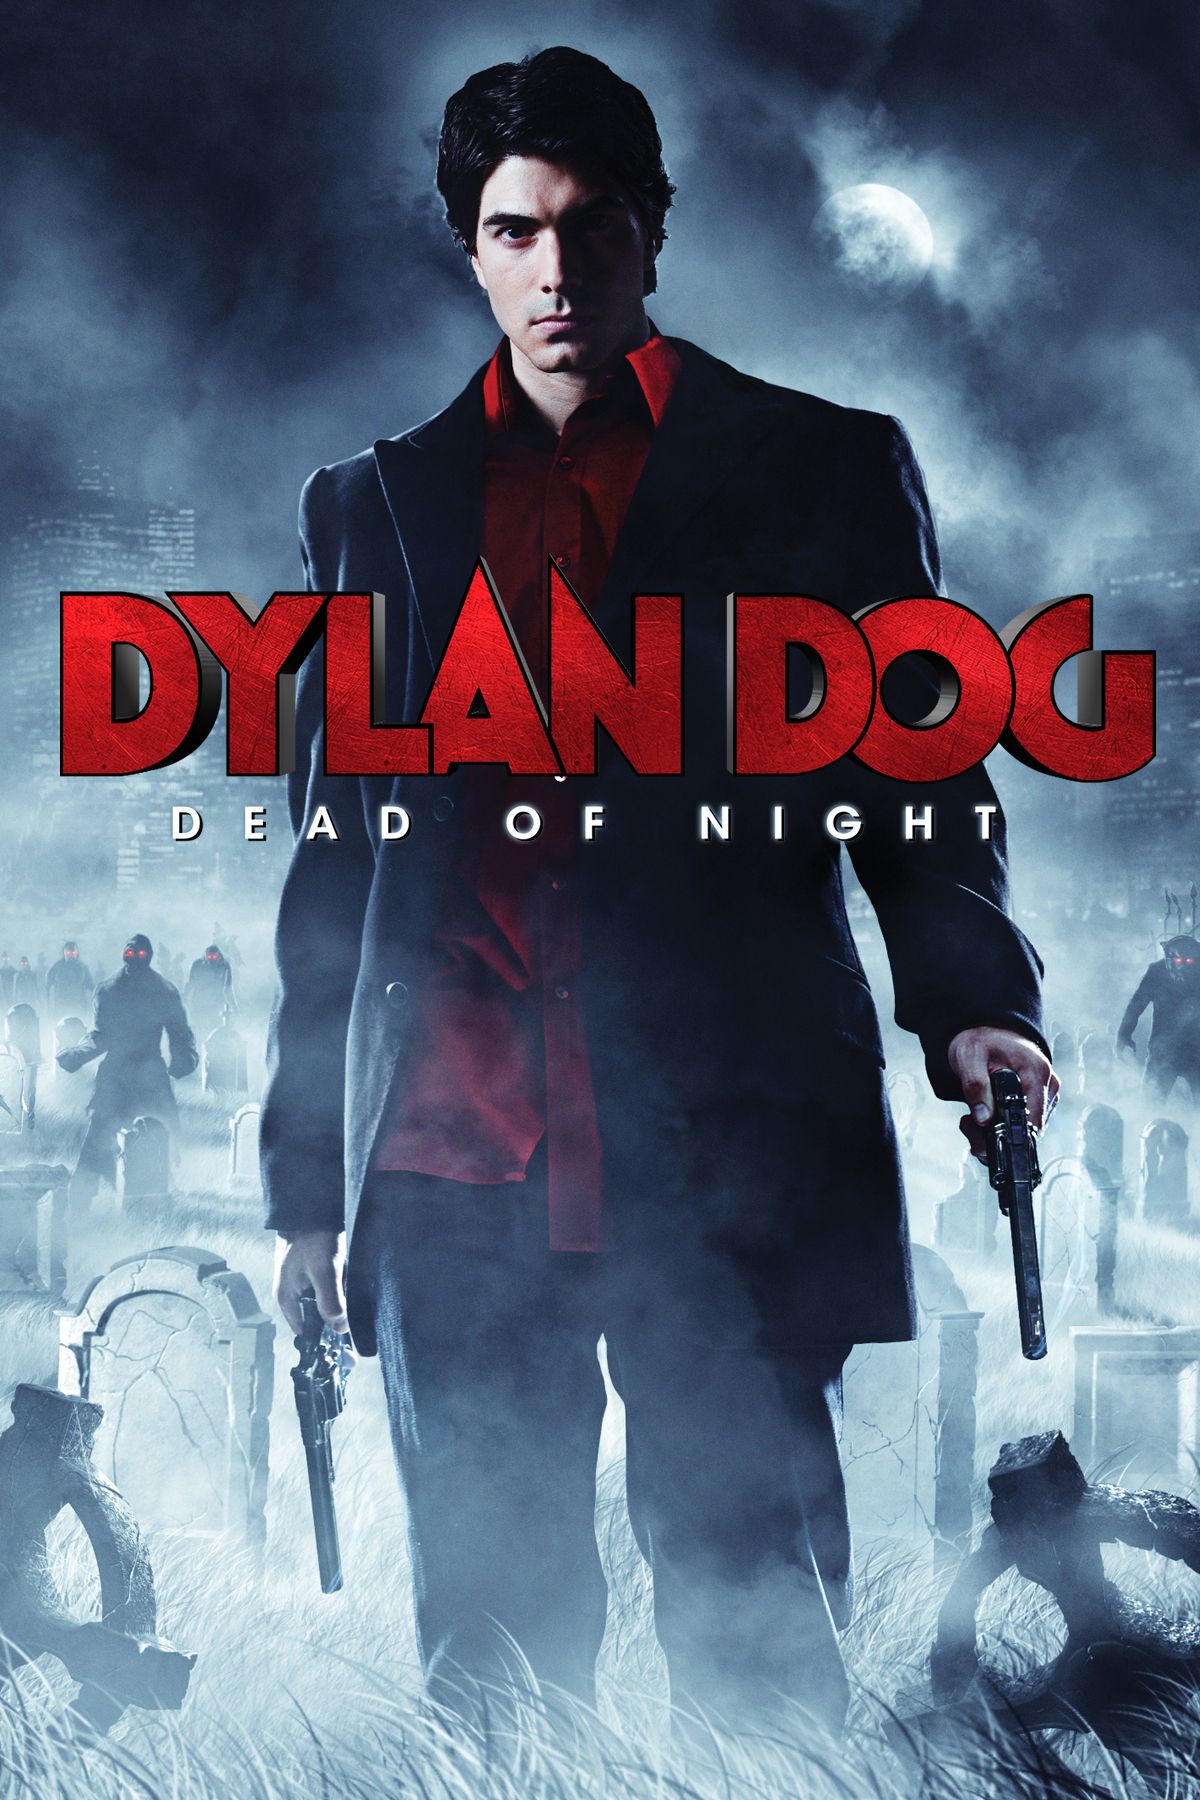 Download Dylan Dog Dead of Night (2010) WEB-DL Dual Audio Hindi 1080p | 720p | 480p [350MB] download